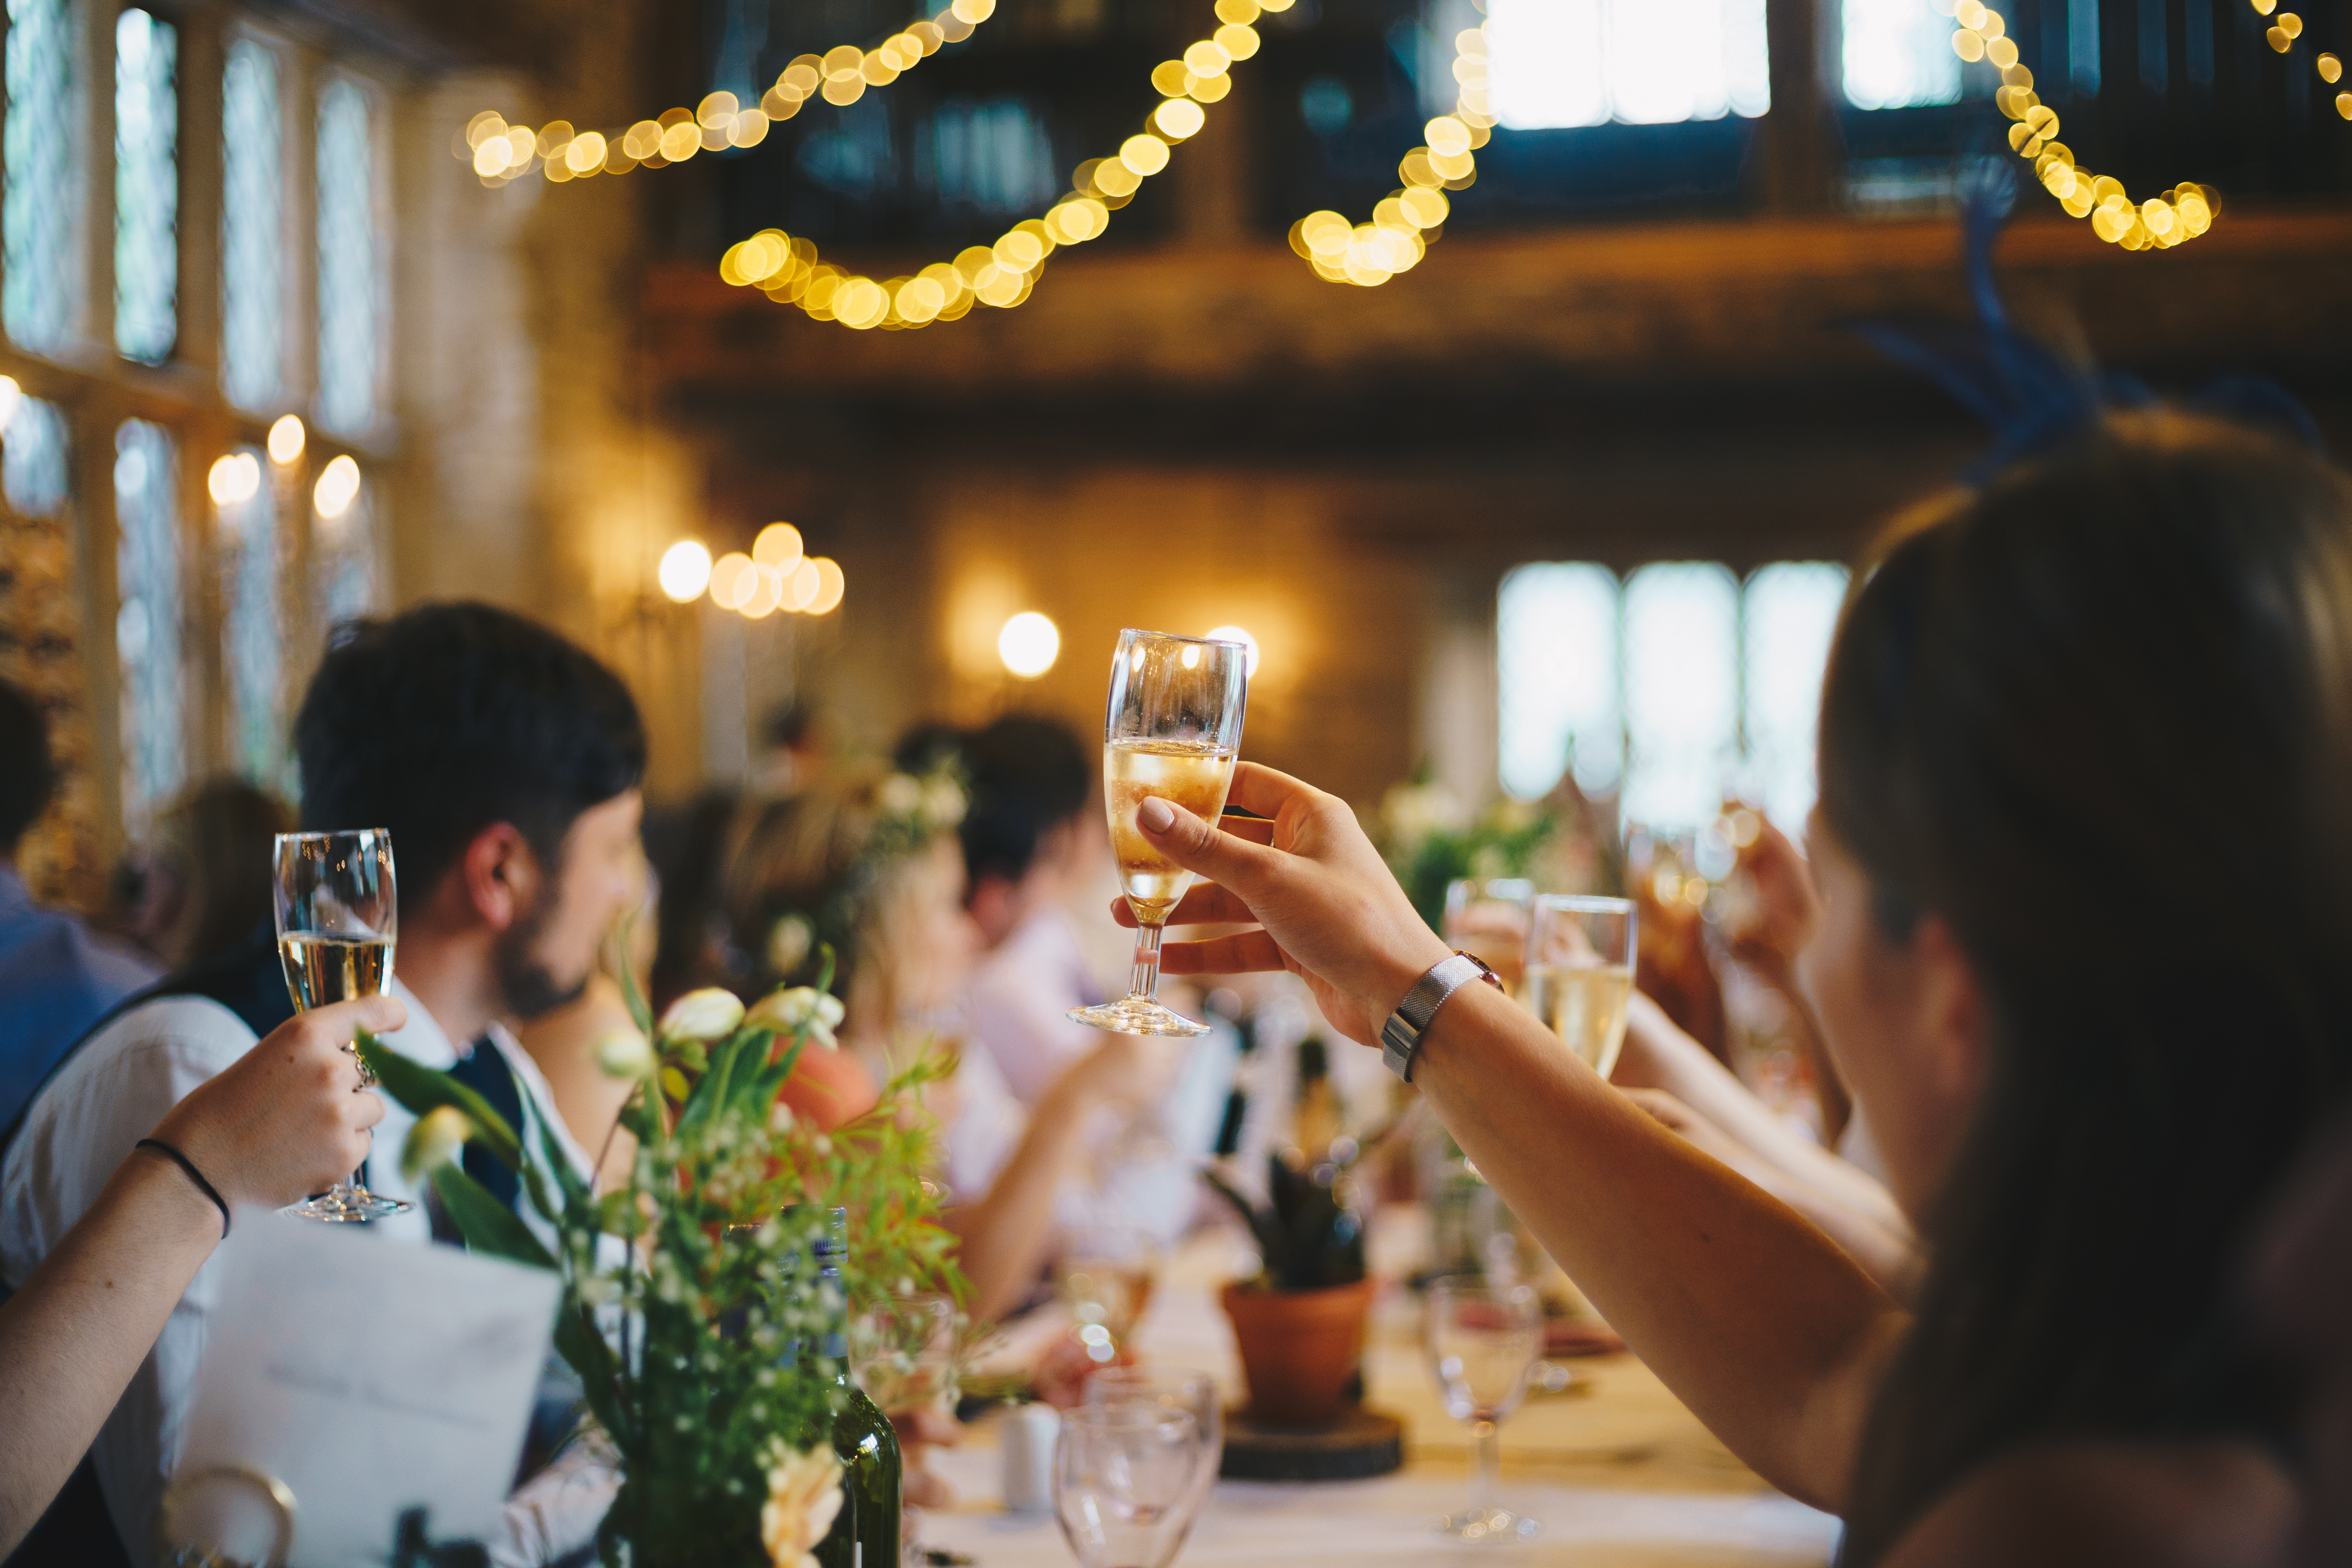 Company Holiday Parties – Can you invite your temporary/contract employees?